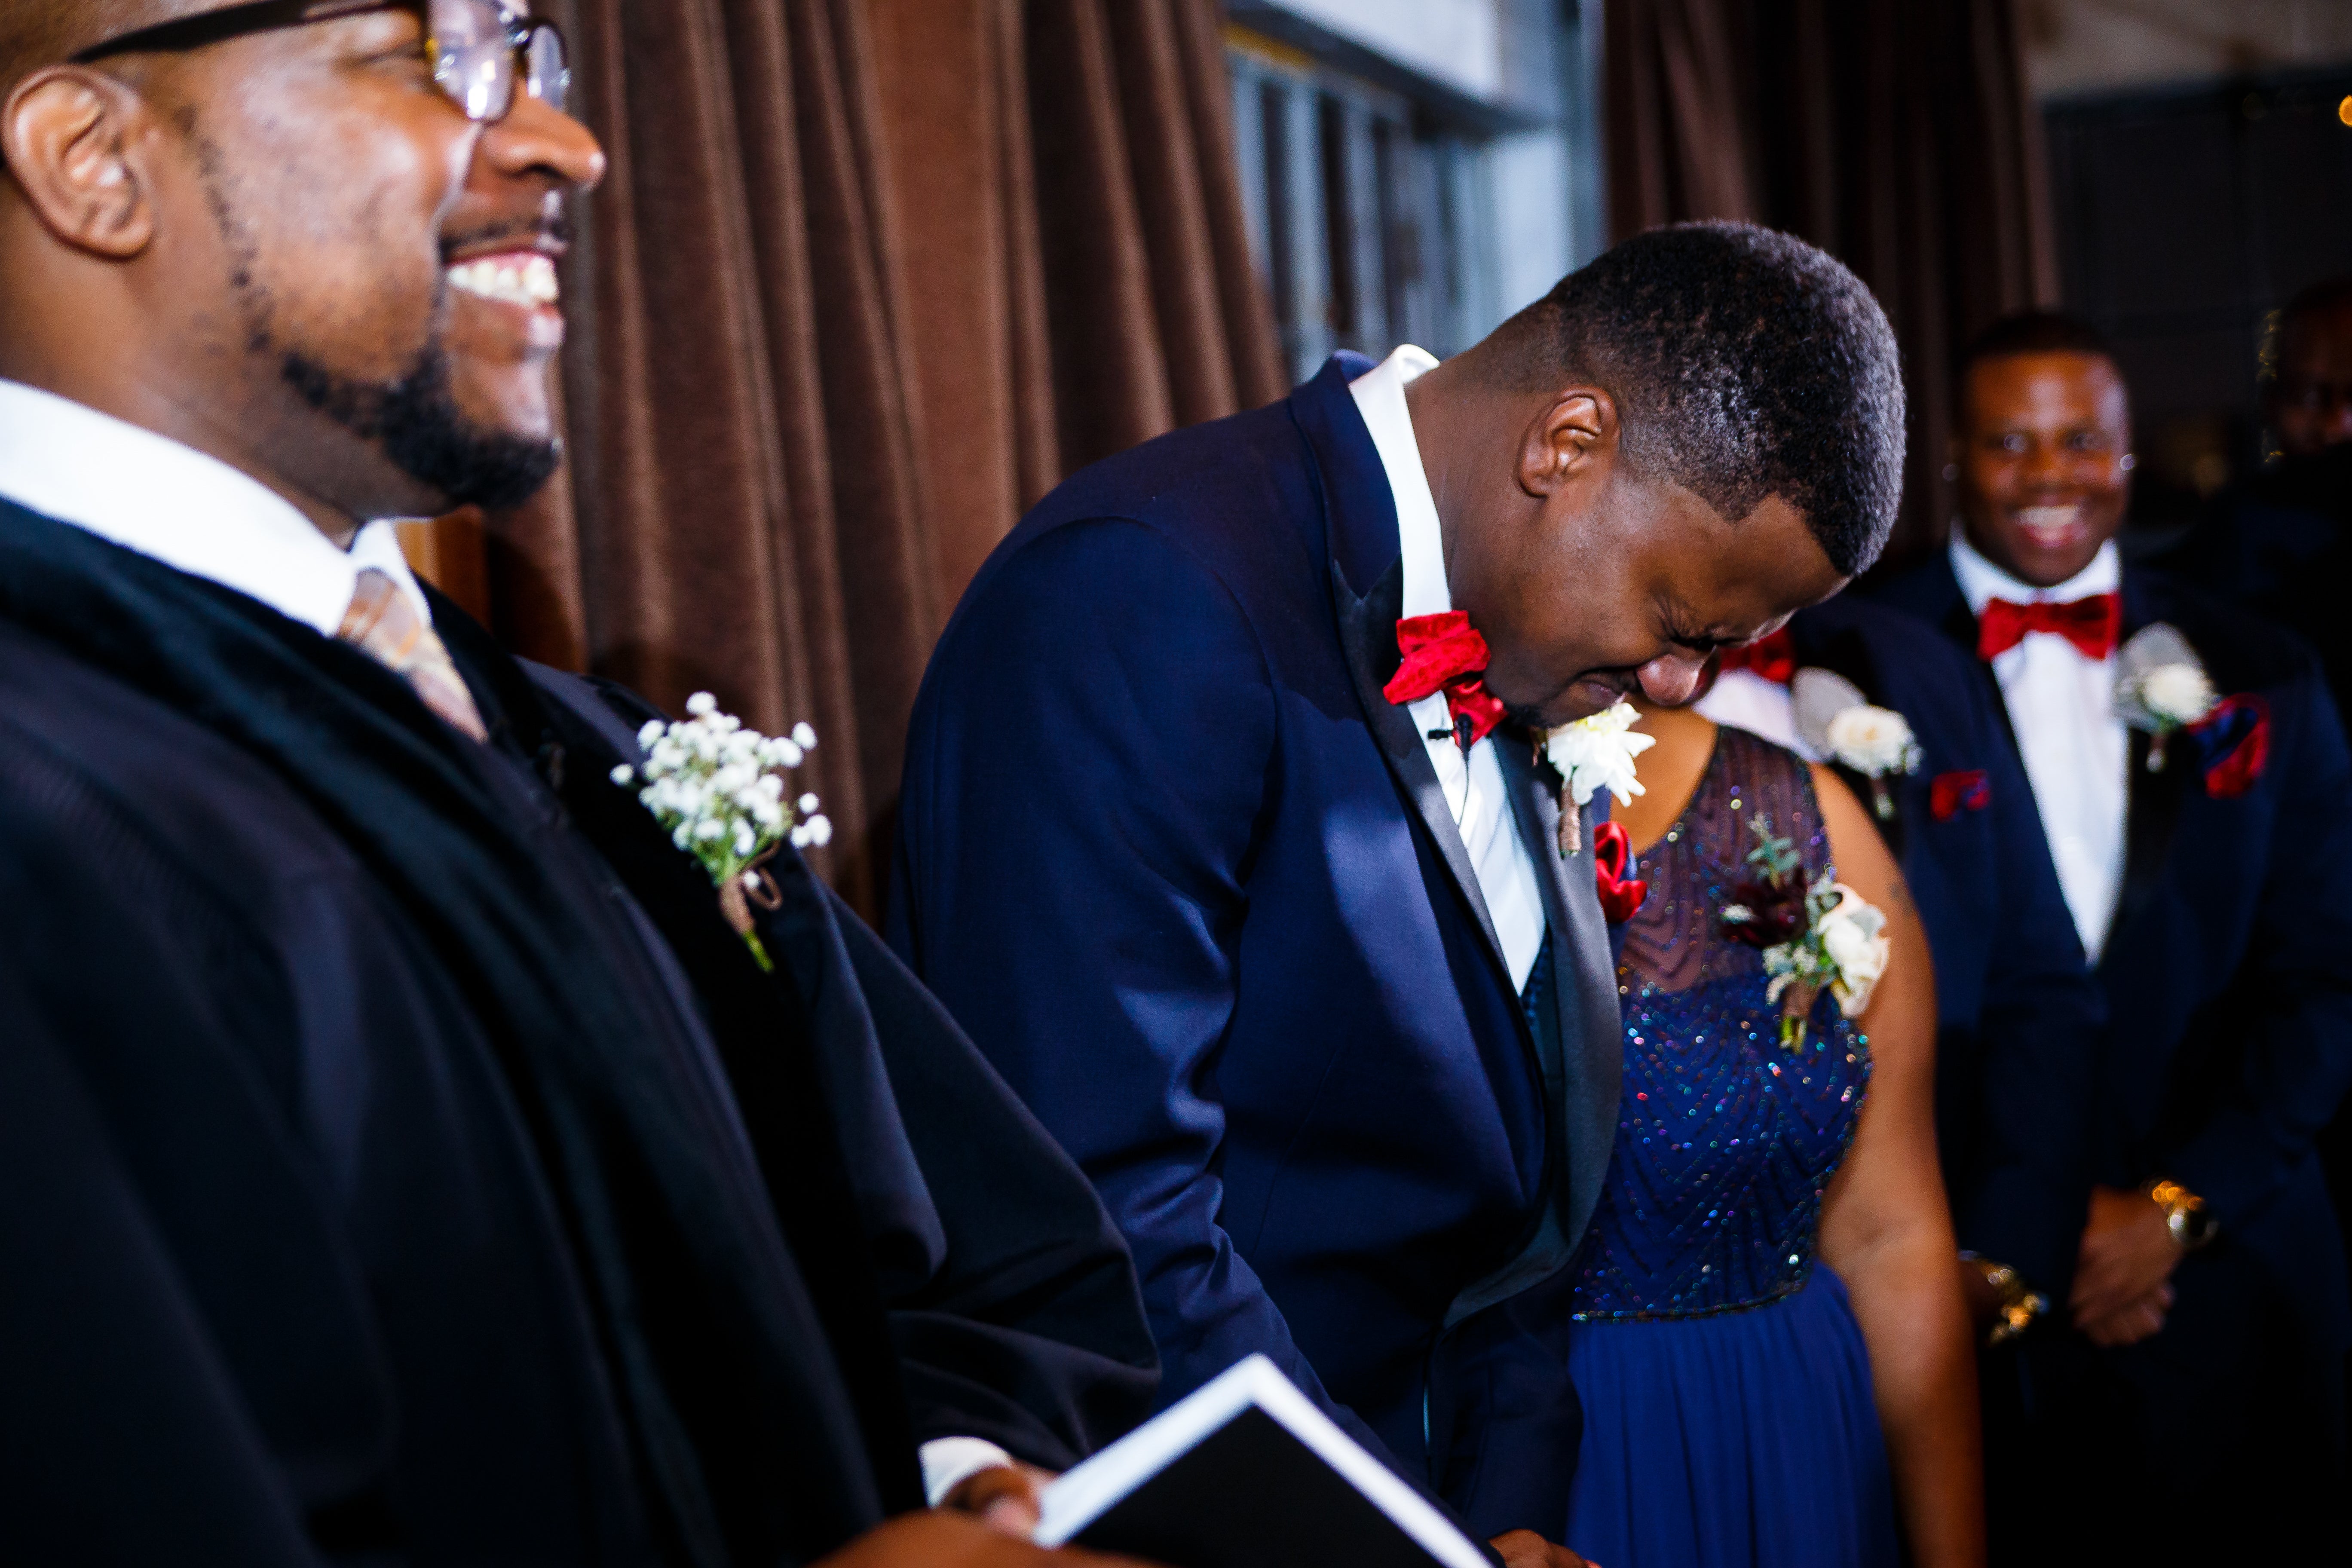 Bridal Bliss: Donald And Aarika's Texas Wedding Was Every Bit Romantic And Chic
